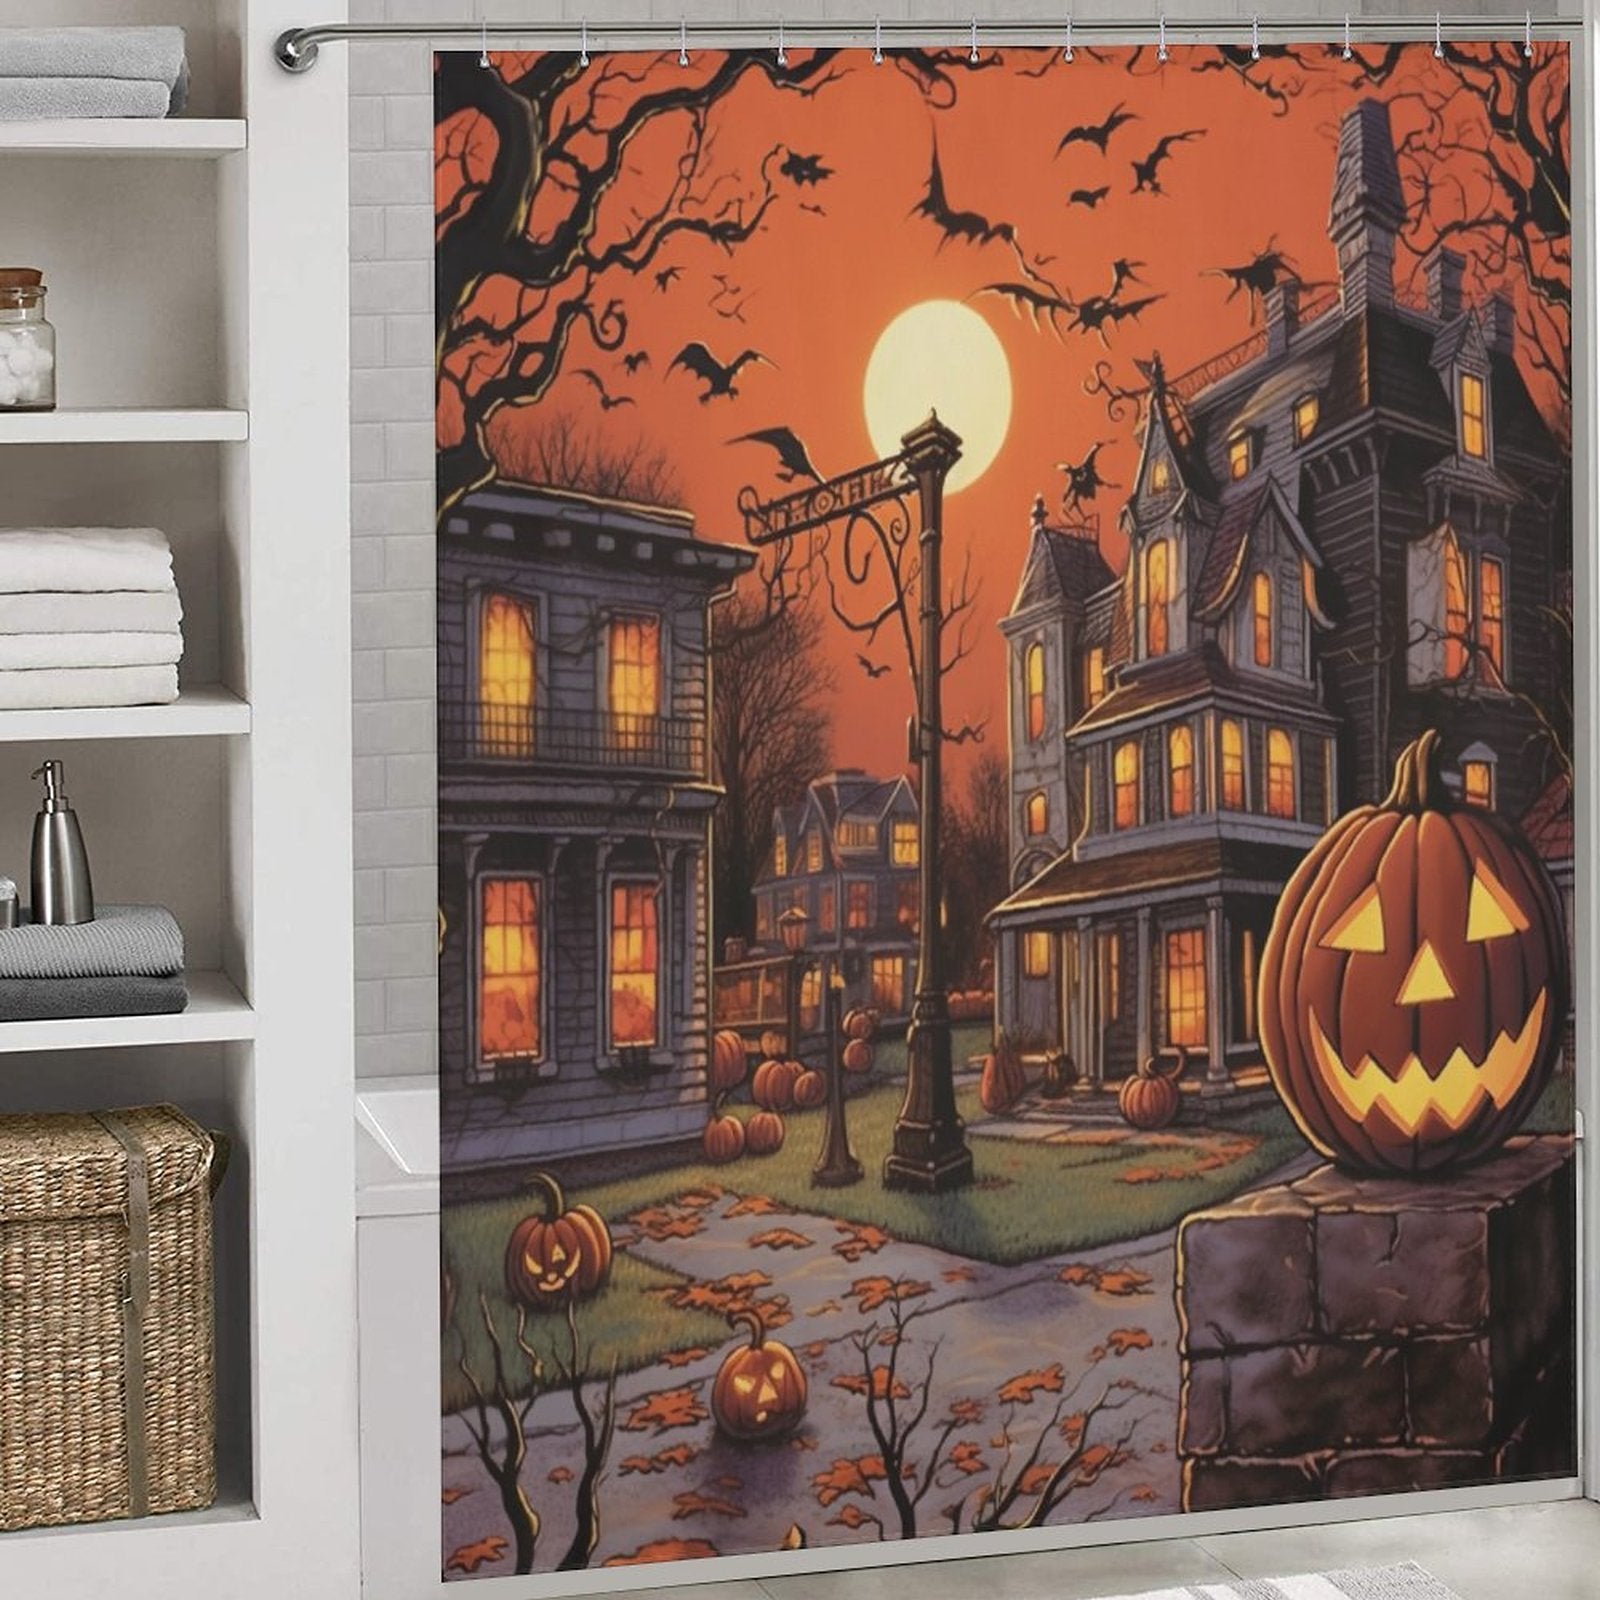 This Pumpkin Halloween Shower Curtain-Cottoncat from Cotton Cat features a 90s-style design with pumpkins and jack o lanterns.